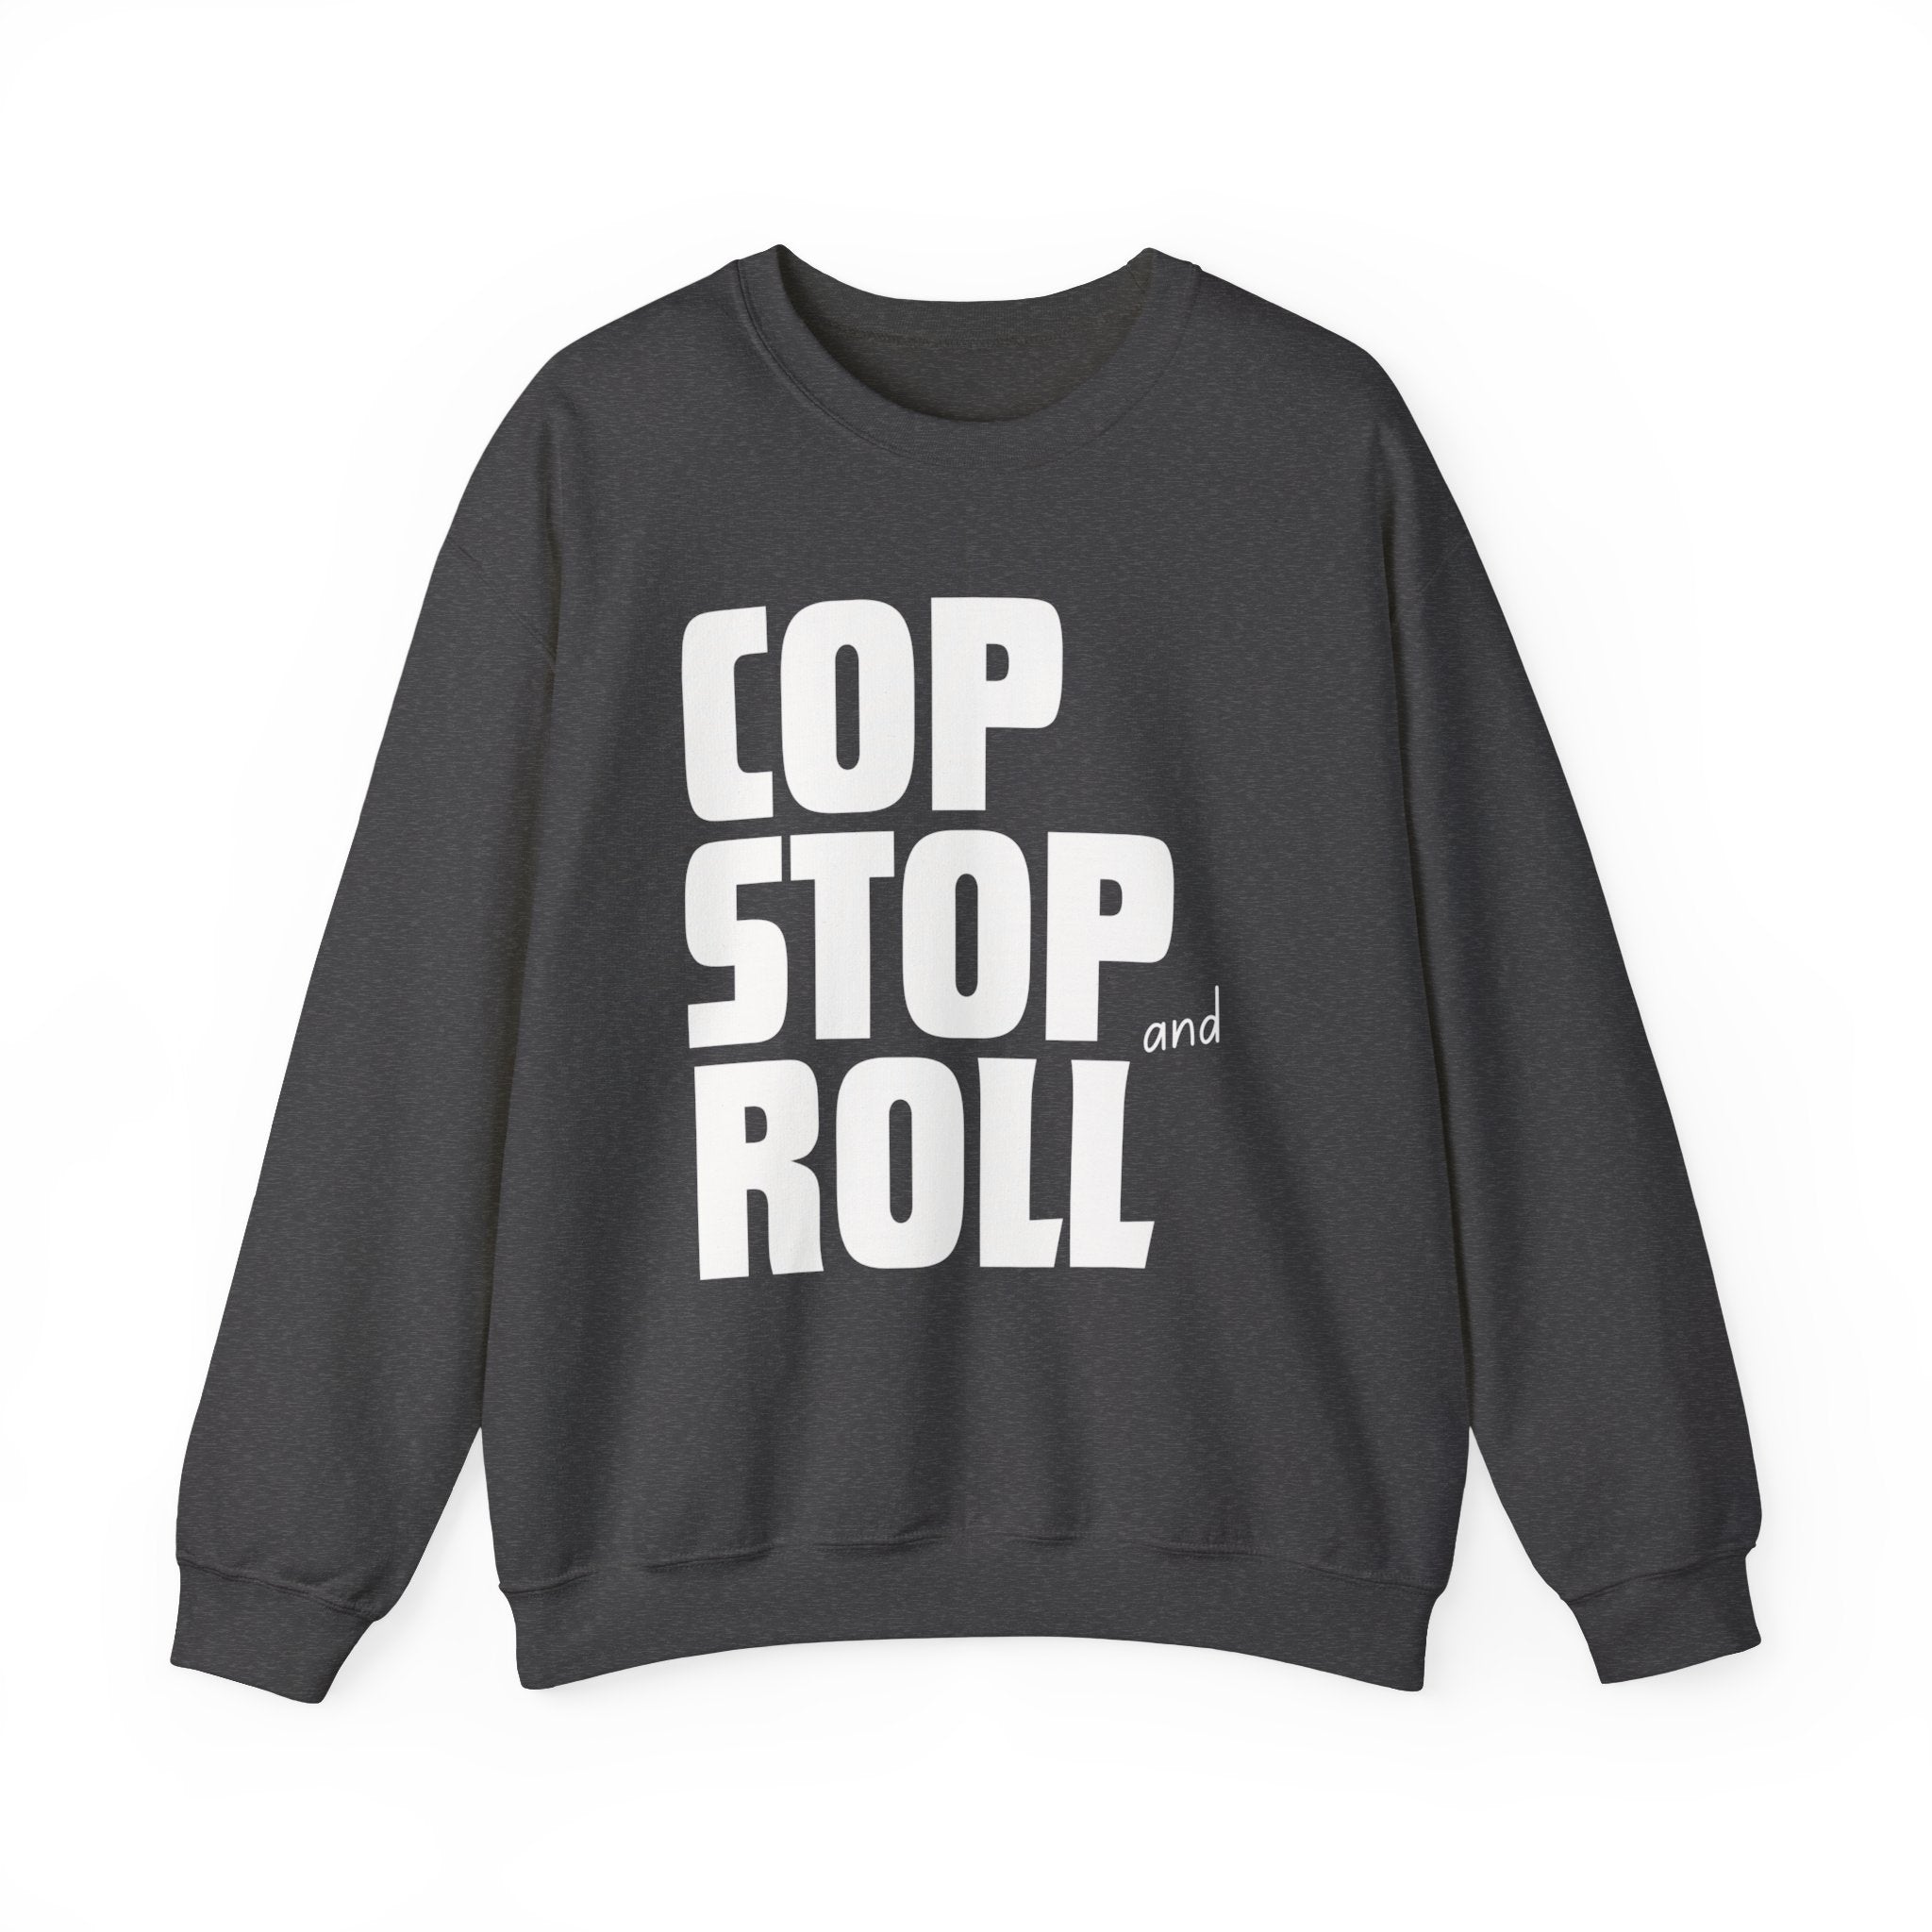 Cop Stop and Roll